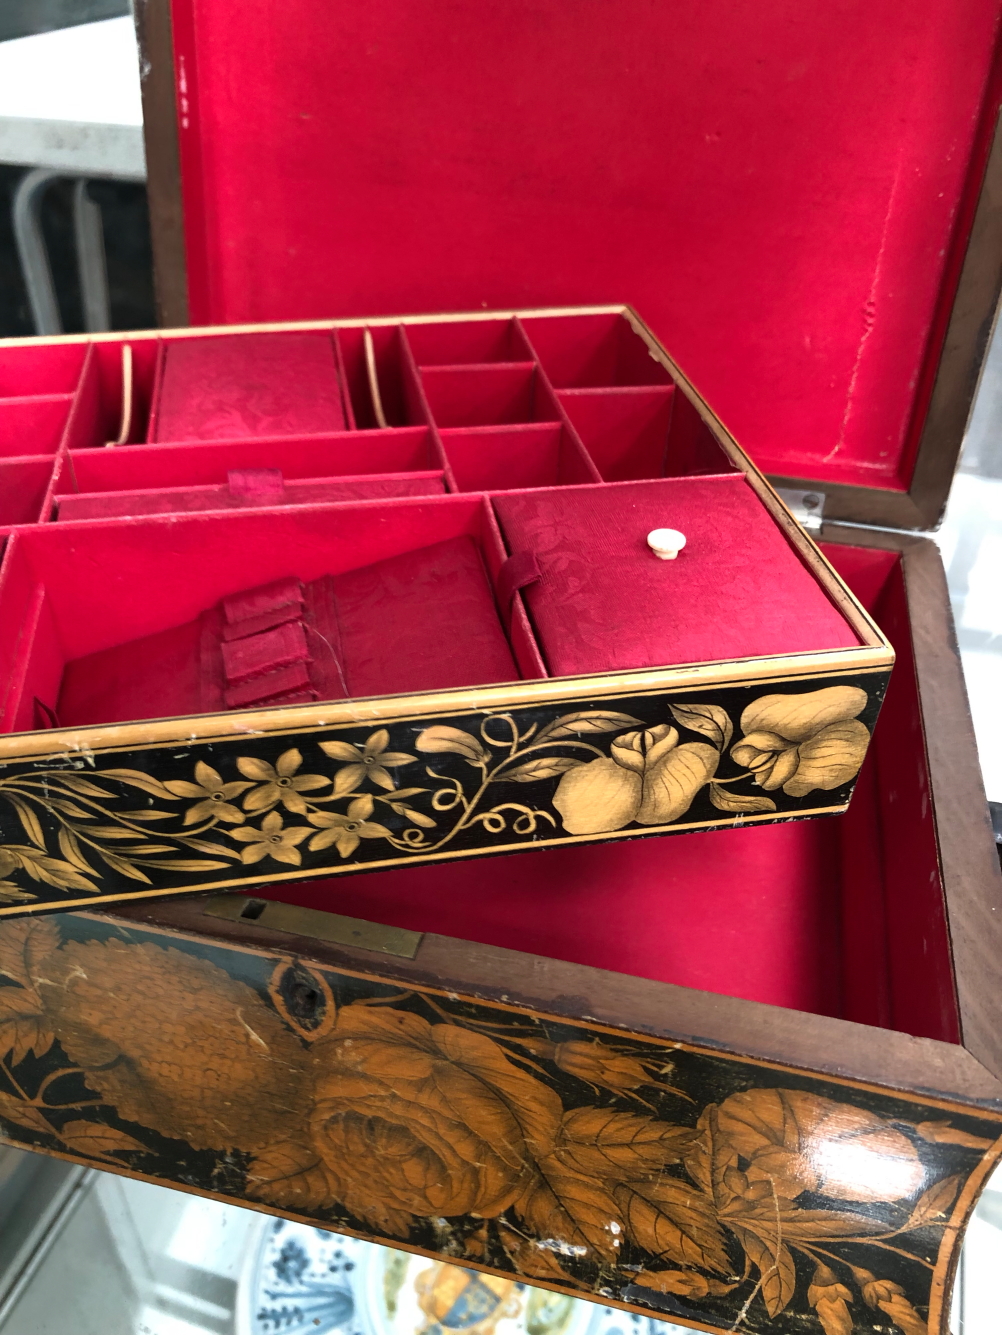 AN ANTIQUE REGENCY PEN WORK WORK BOX WITH LIFT OUT TRAY. - Image 9 of 11